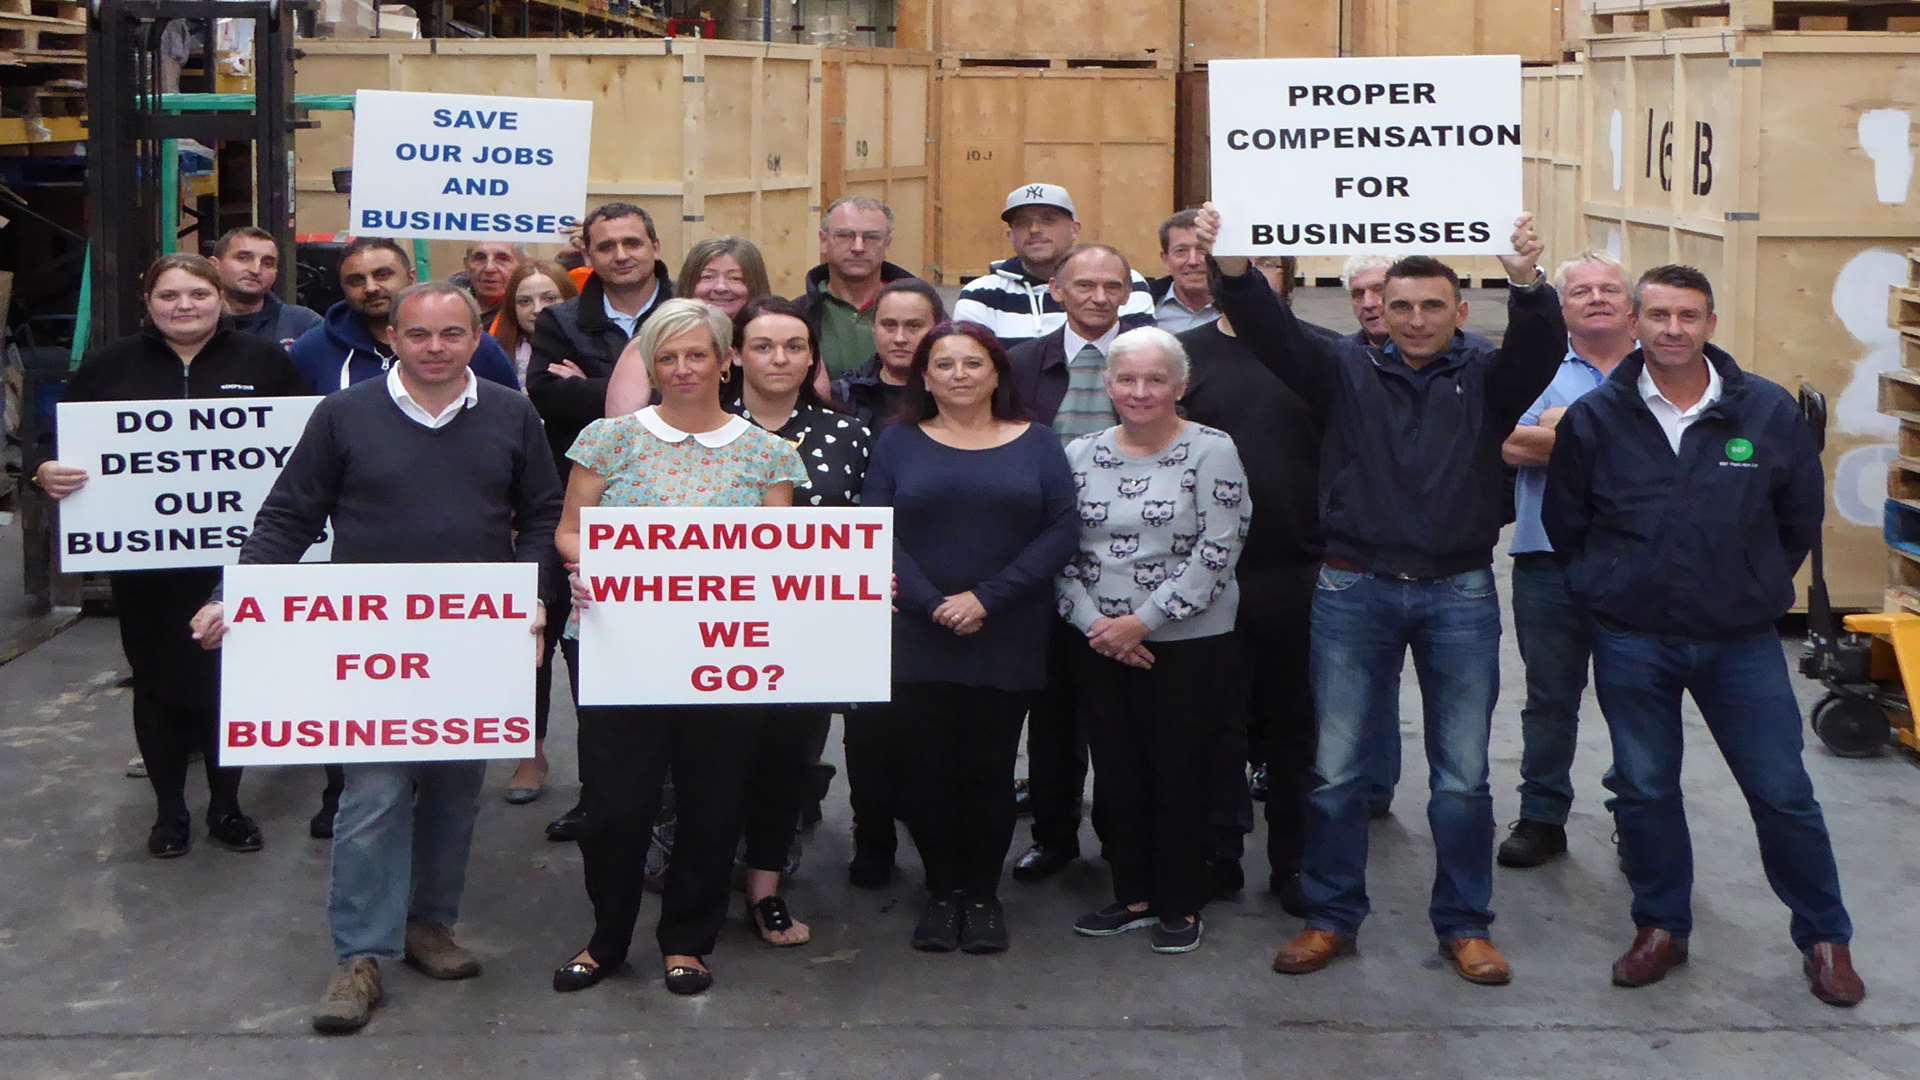 Members of the Peninsula Management Group are concerned about what will happen to their livelihoods if London Paramount goes ahead